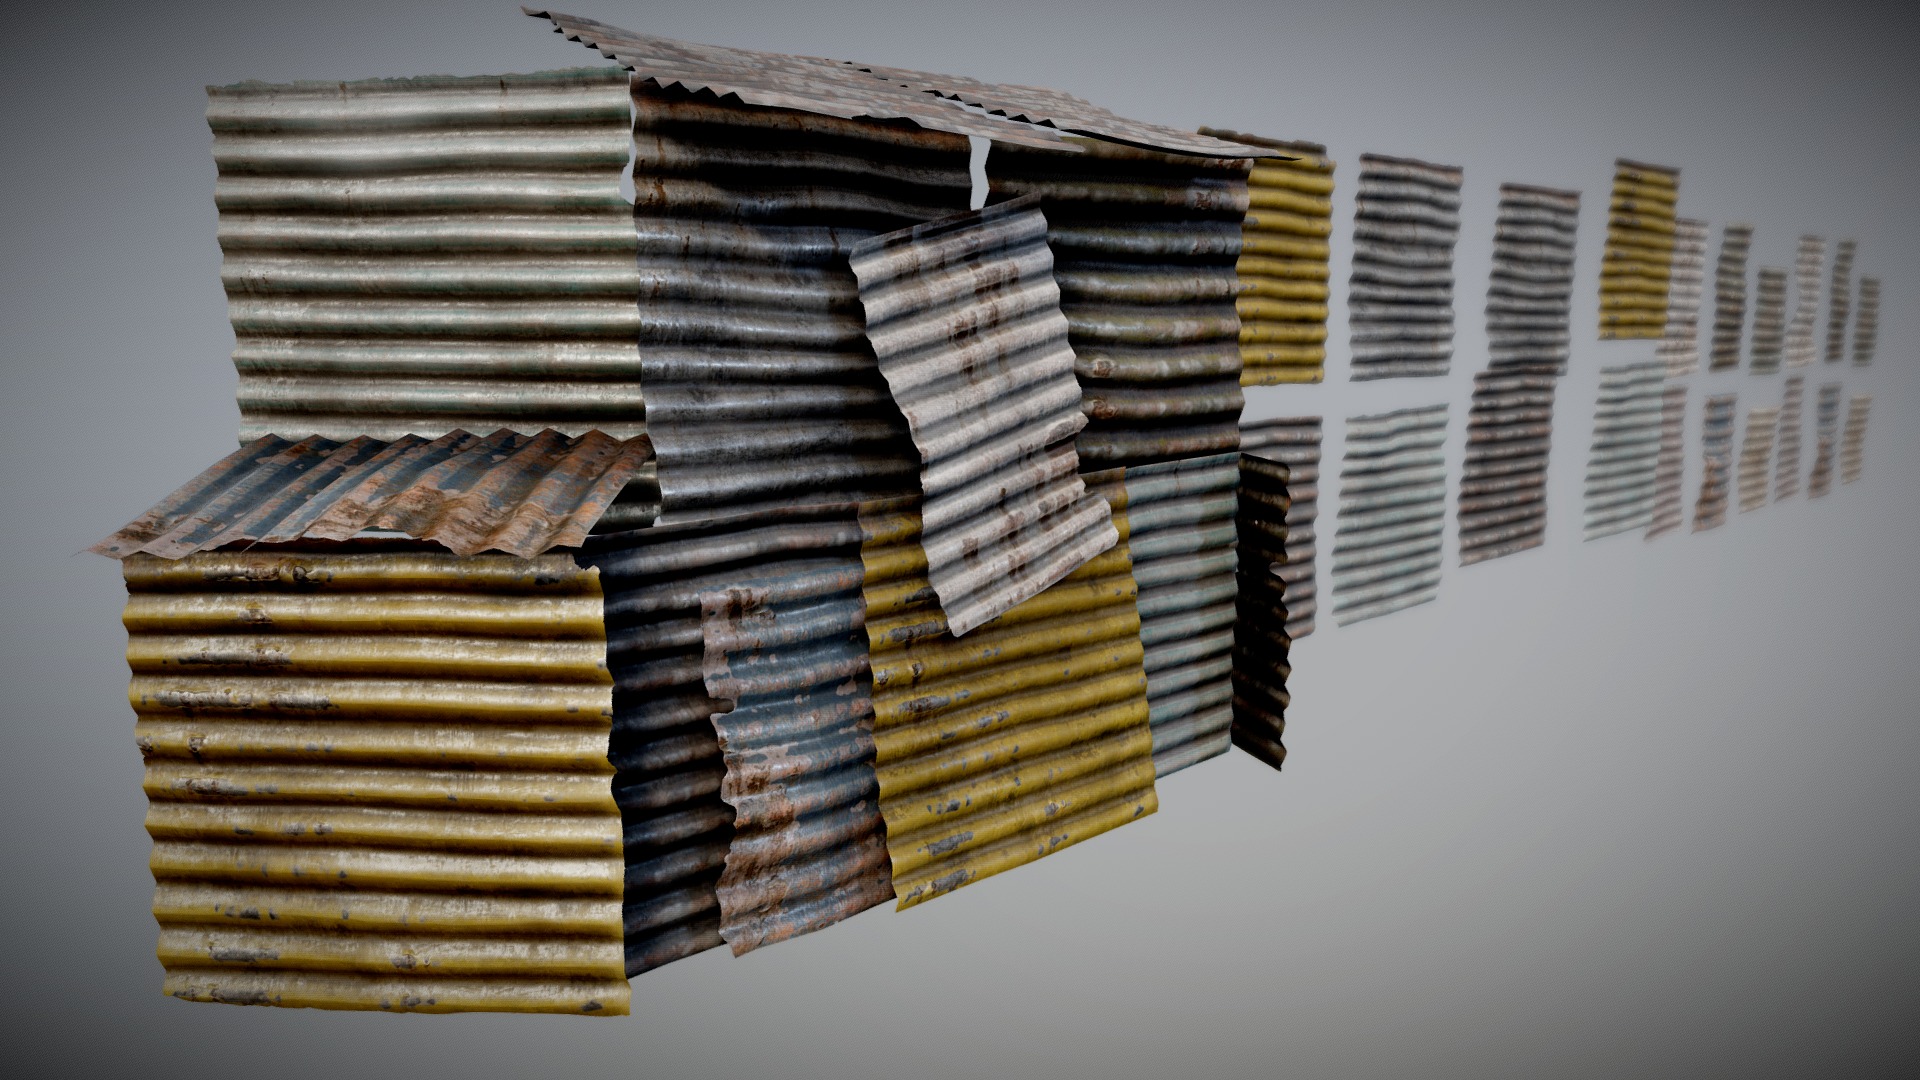 Salvage Metal Collection PBR

Very Detailed Low Poly Salvage Metal Collection with High-Quality PBR Textures.

12 Meshes included.

Fits perfect for any PBR game as Decoration etc. like Post Apocalyptic Environment for buildings or squatter camps etc.

Created with 3DSMAX, Zbrush and Substance Painter.

Standard Textures
Base Color, Metallic, Roughness, Height, AO, Normal, Maps

Unreal 4 Textures
Base Color, Normal, OcclusionRoughnessMetallic

Unity 5/2017 Textures
Albedo, SpecularSmoothness, Normal, and AO Maps

4096x4096 TGA Textures
use the alpha maps to make the metal looks more torn.
I recommend to use doubles-sided materials

Please Note, this PBR Textures Only. 

Low Poly Triangles 

2364 Tris
1461 Verts

File Formats :

.Max2018
.Max2017
.Max2016
.Max2015
.FBX
.OBJ
.3DS
.DAE - Salvage Metal PBR - Buy Royalty Free 3D model by GamePoly (@triix3d) 3d model